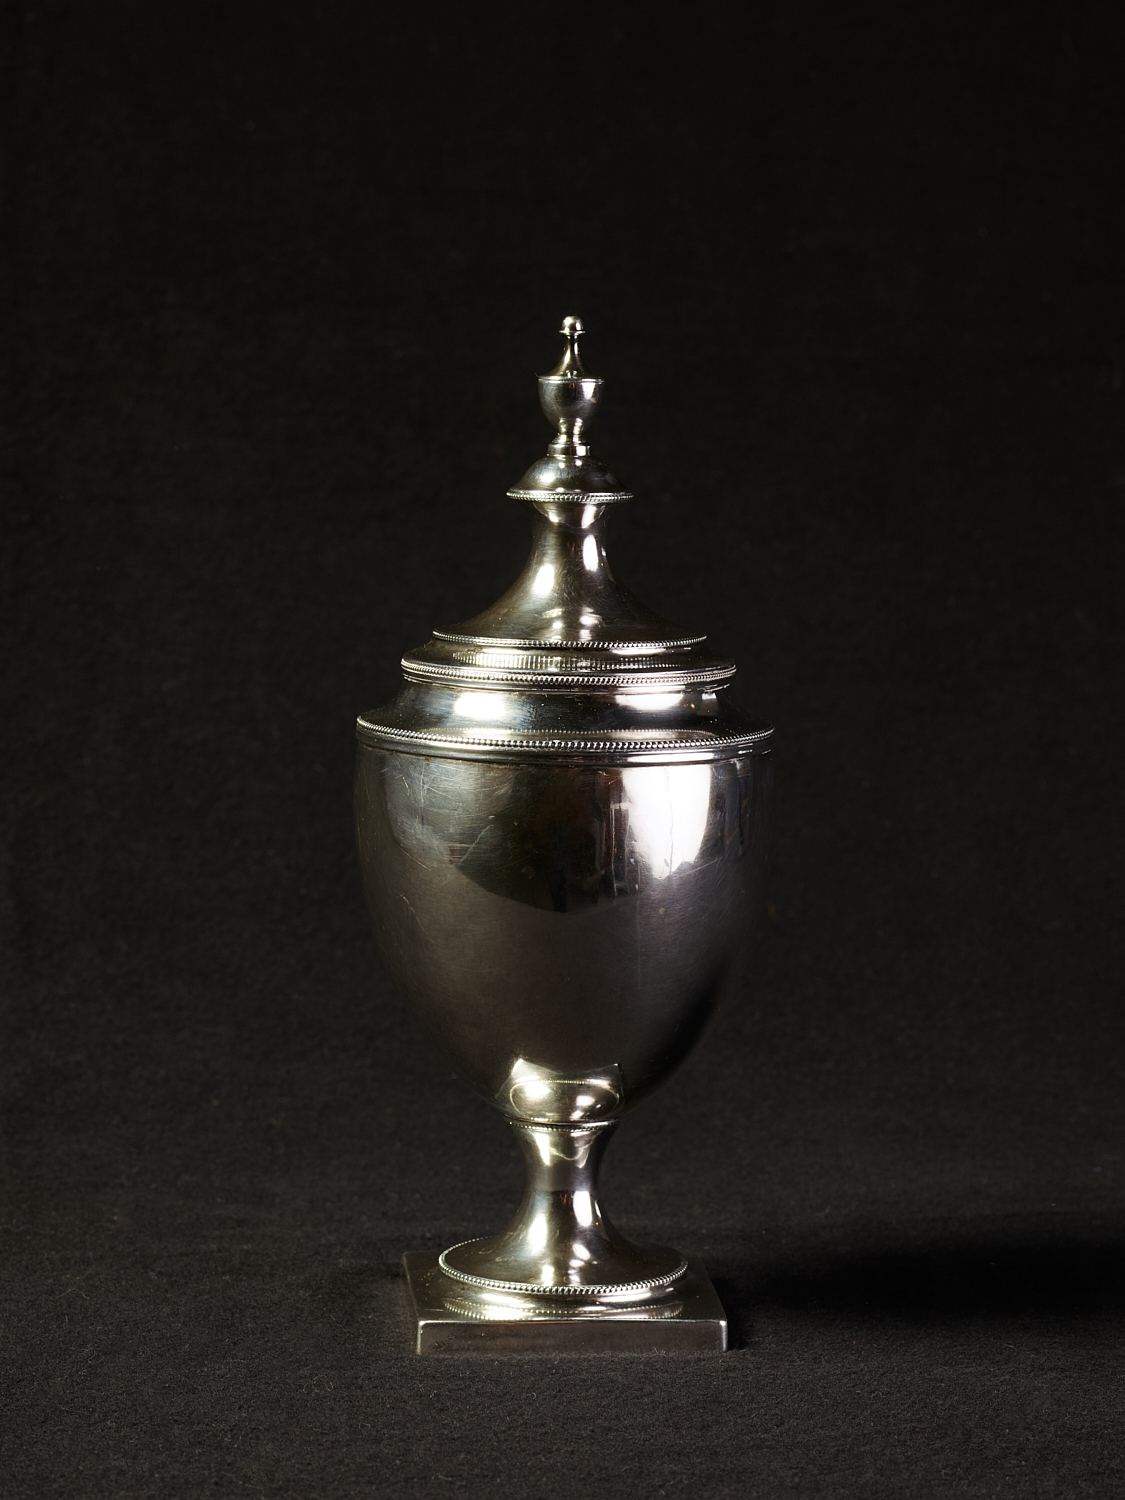 St. Louis Silver Co. cylindrical sugar bowl with two handles and a lid used  by by the Jesuits at the Saint Stanislaus Seminary in Florissant, Missouri.  Title: St. Louis Silver Co. Sugar